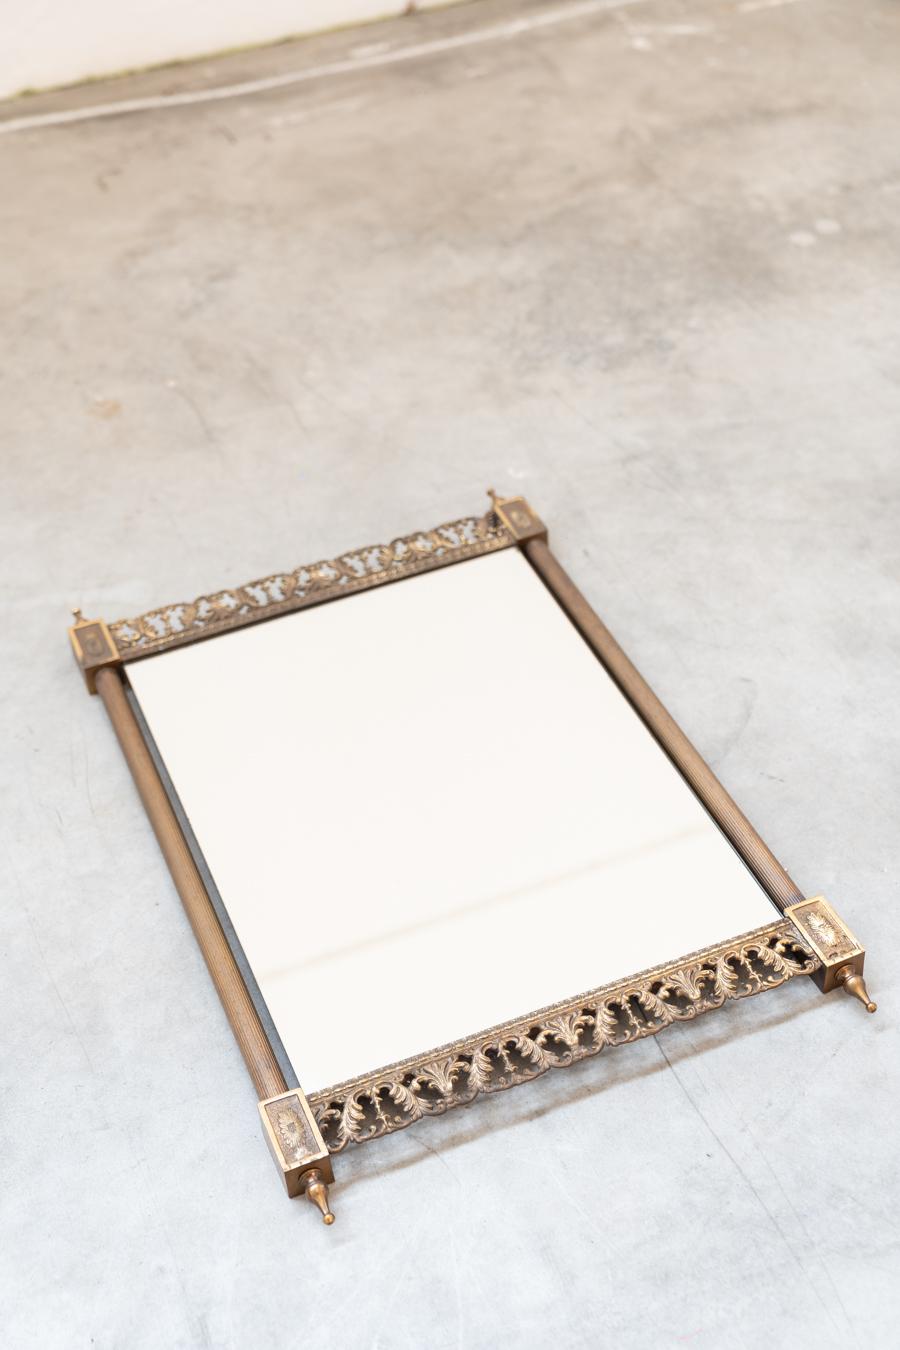 Wall mirror, brass with carved and pierced profiles at top and bottom, Mid Century.
Brass mirror, with carved profiles, 1950s
H79 x L51.5 x P3 - Kg5
Style
Vintage
Periodo del design
1950 - 1959
Production Period
1950 - 1959
Year